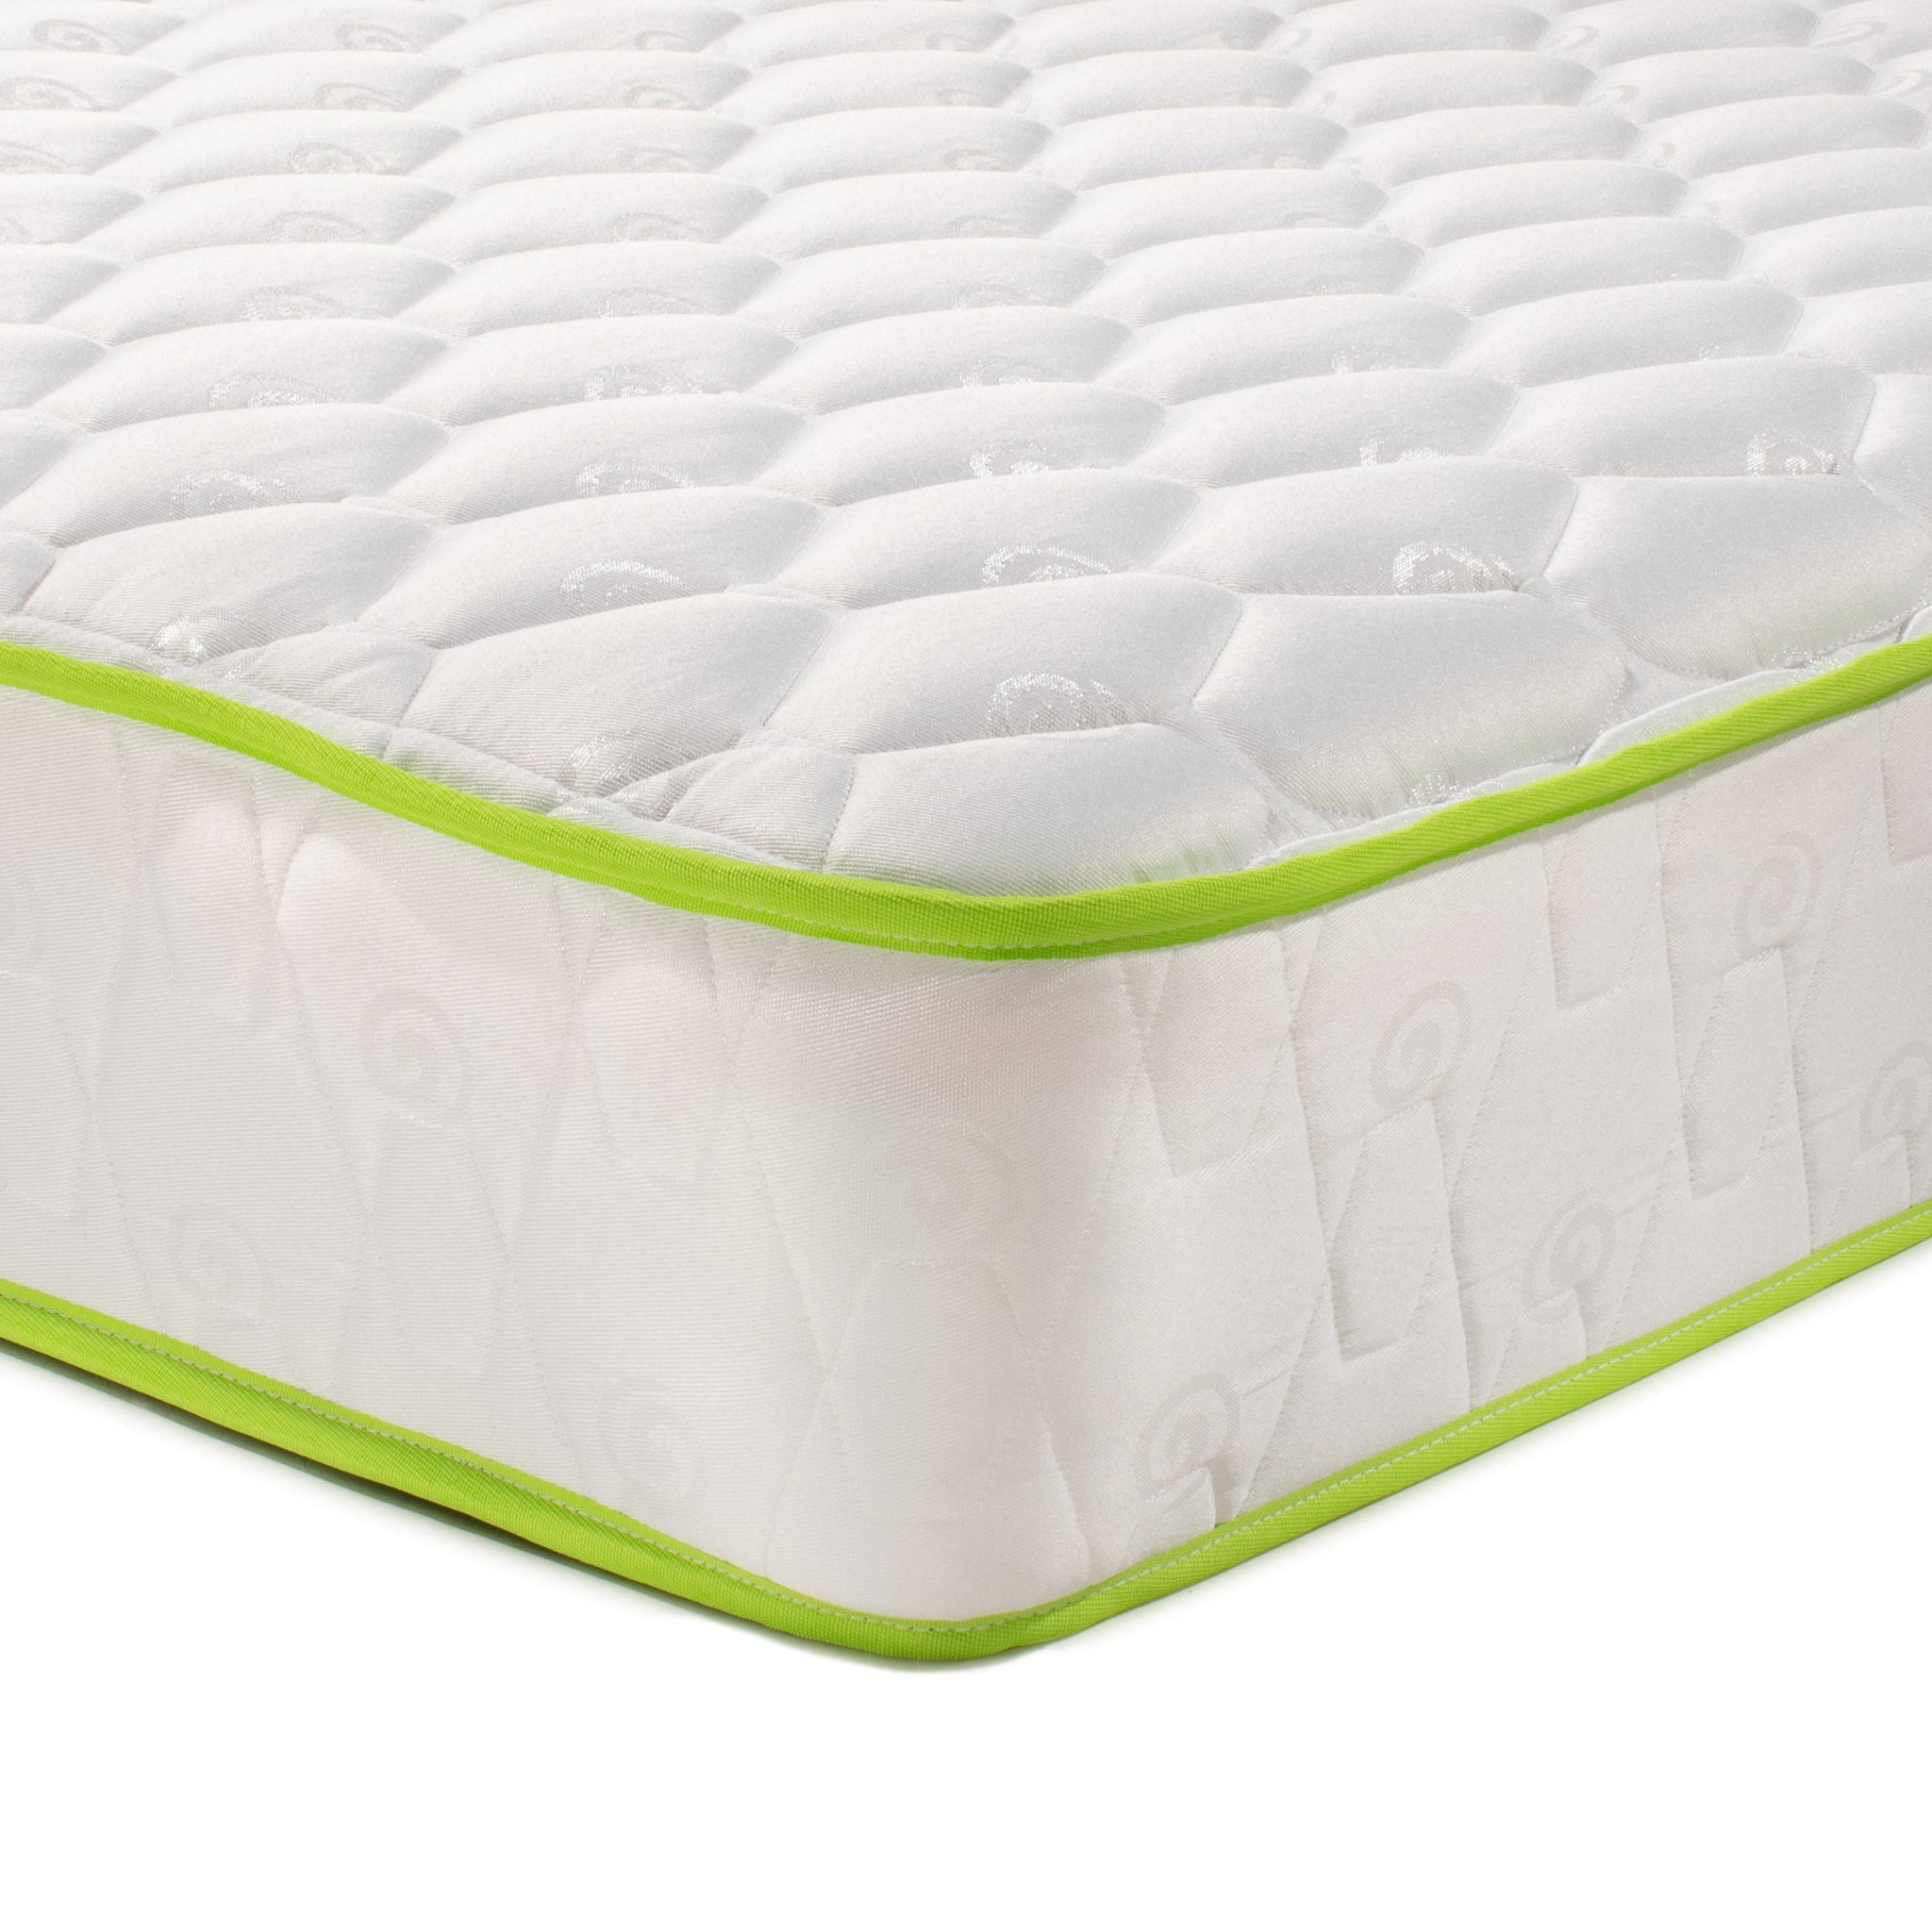 Back Rest Double Size Innerspring Mattress - Australian Made - 3 Year Warranty - Free Delivery - Melbourne Mattress Factory